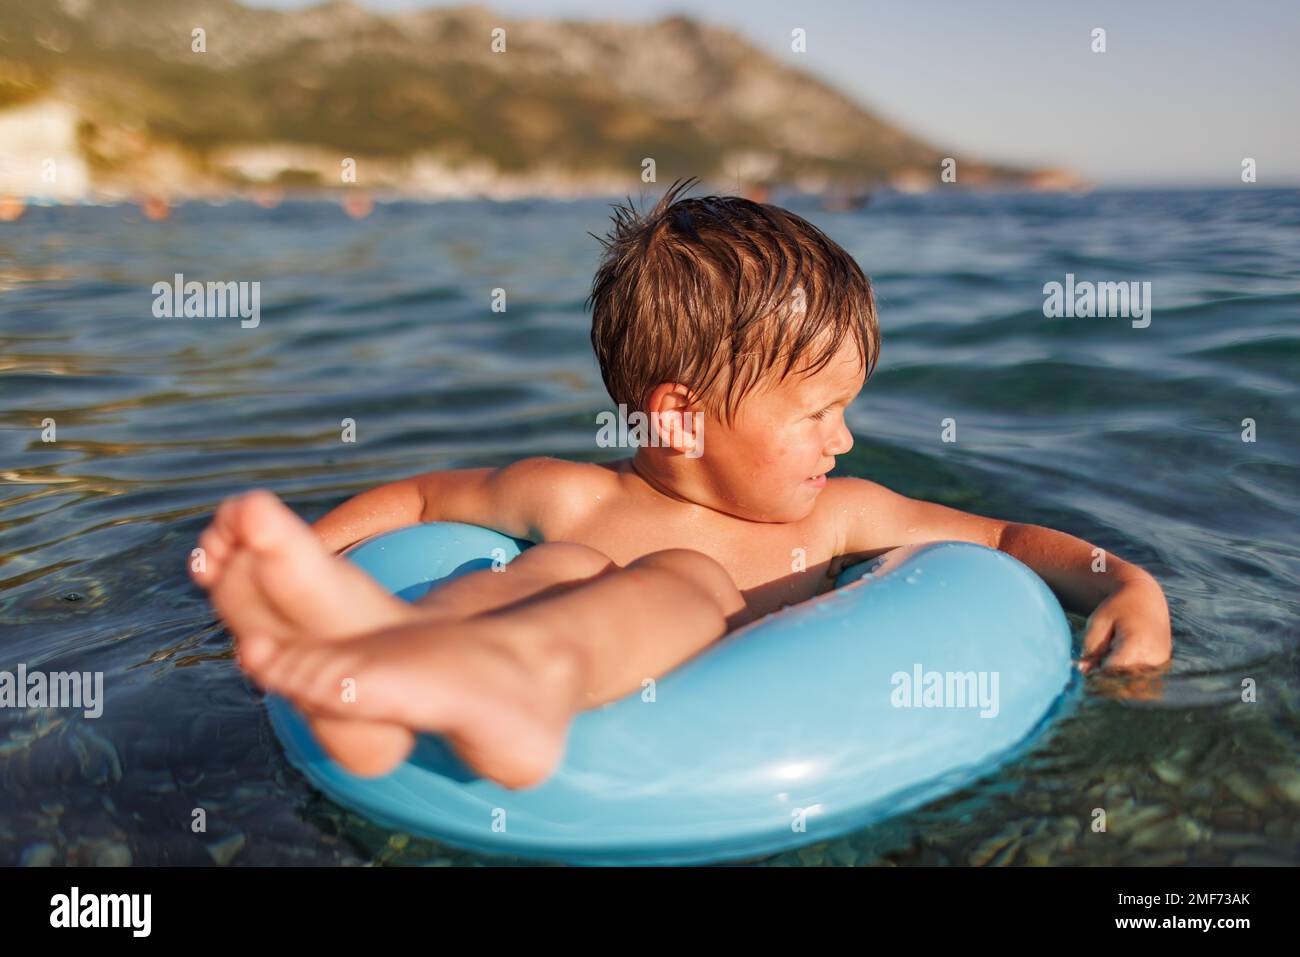 The baby sits in a blue inflatable small circle and looks for his mother, swimming in the blue warm summer Adriatic Sea in the evening sunlight Stock Photo